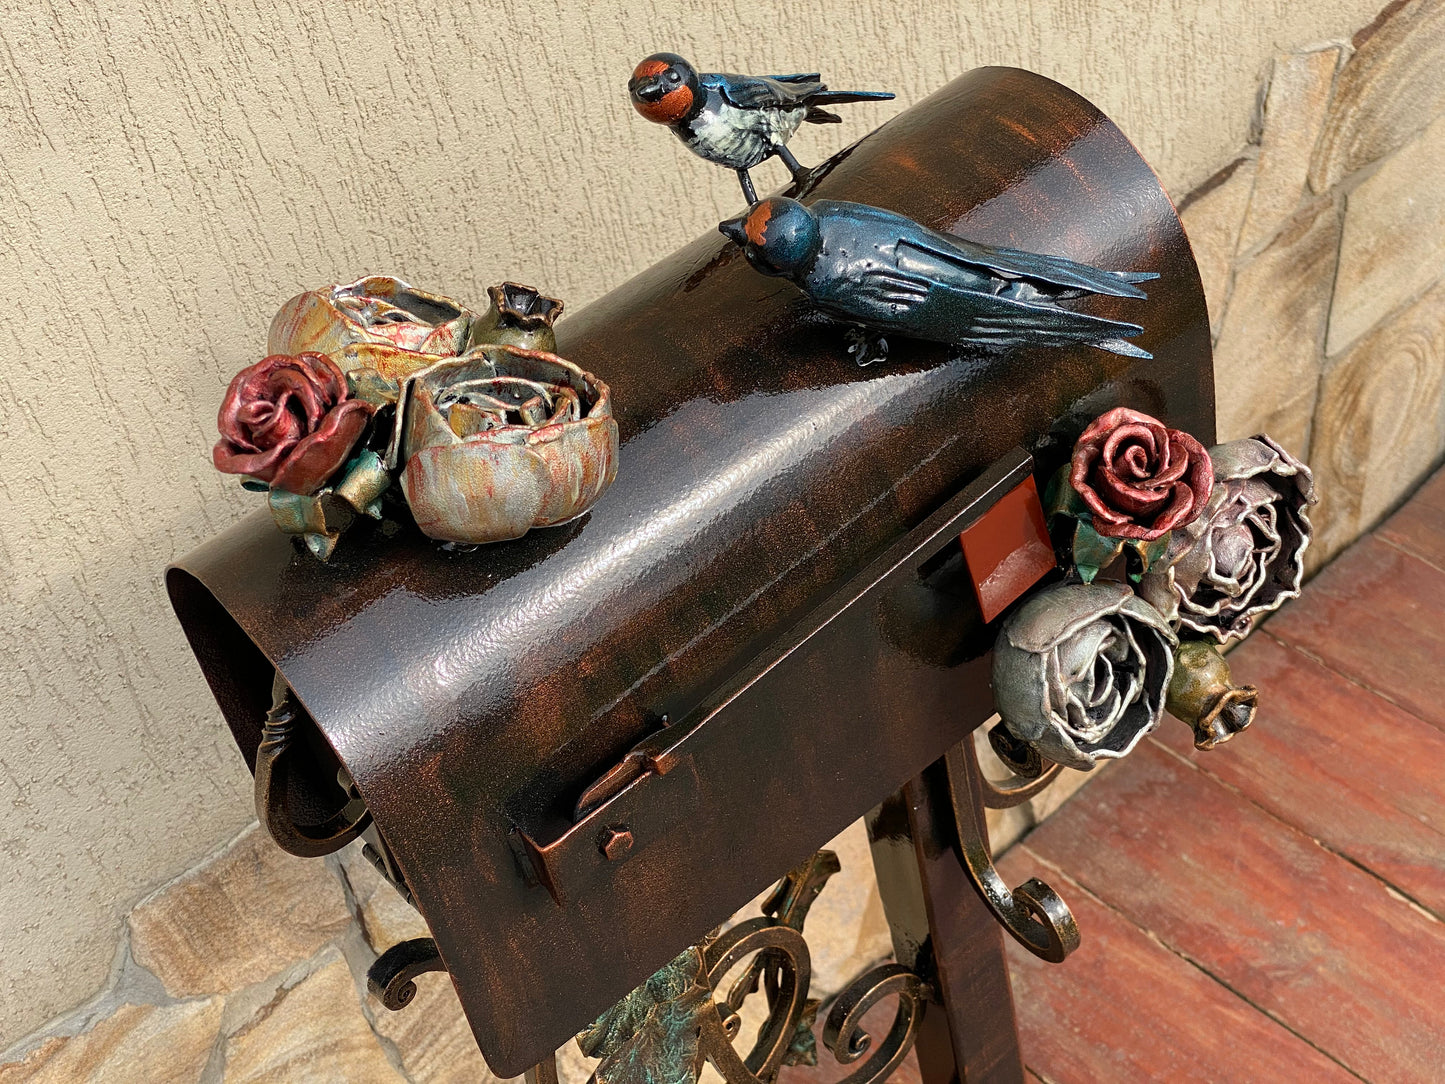 Mail box, mailbox, Christmas, birthday, garden, yard, mother, gift for wife, anniversary, rose, iron gift, Mothers Day, retirement, flower